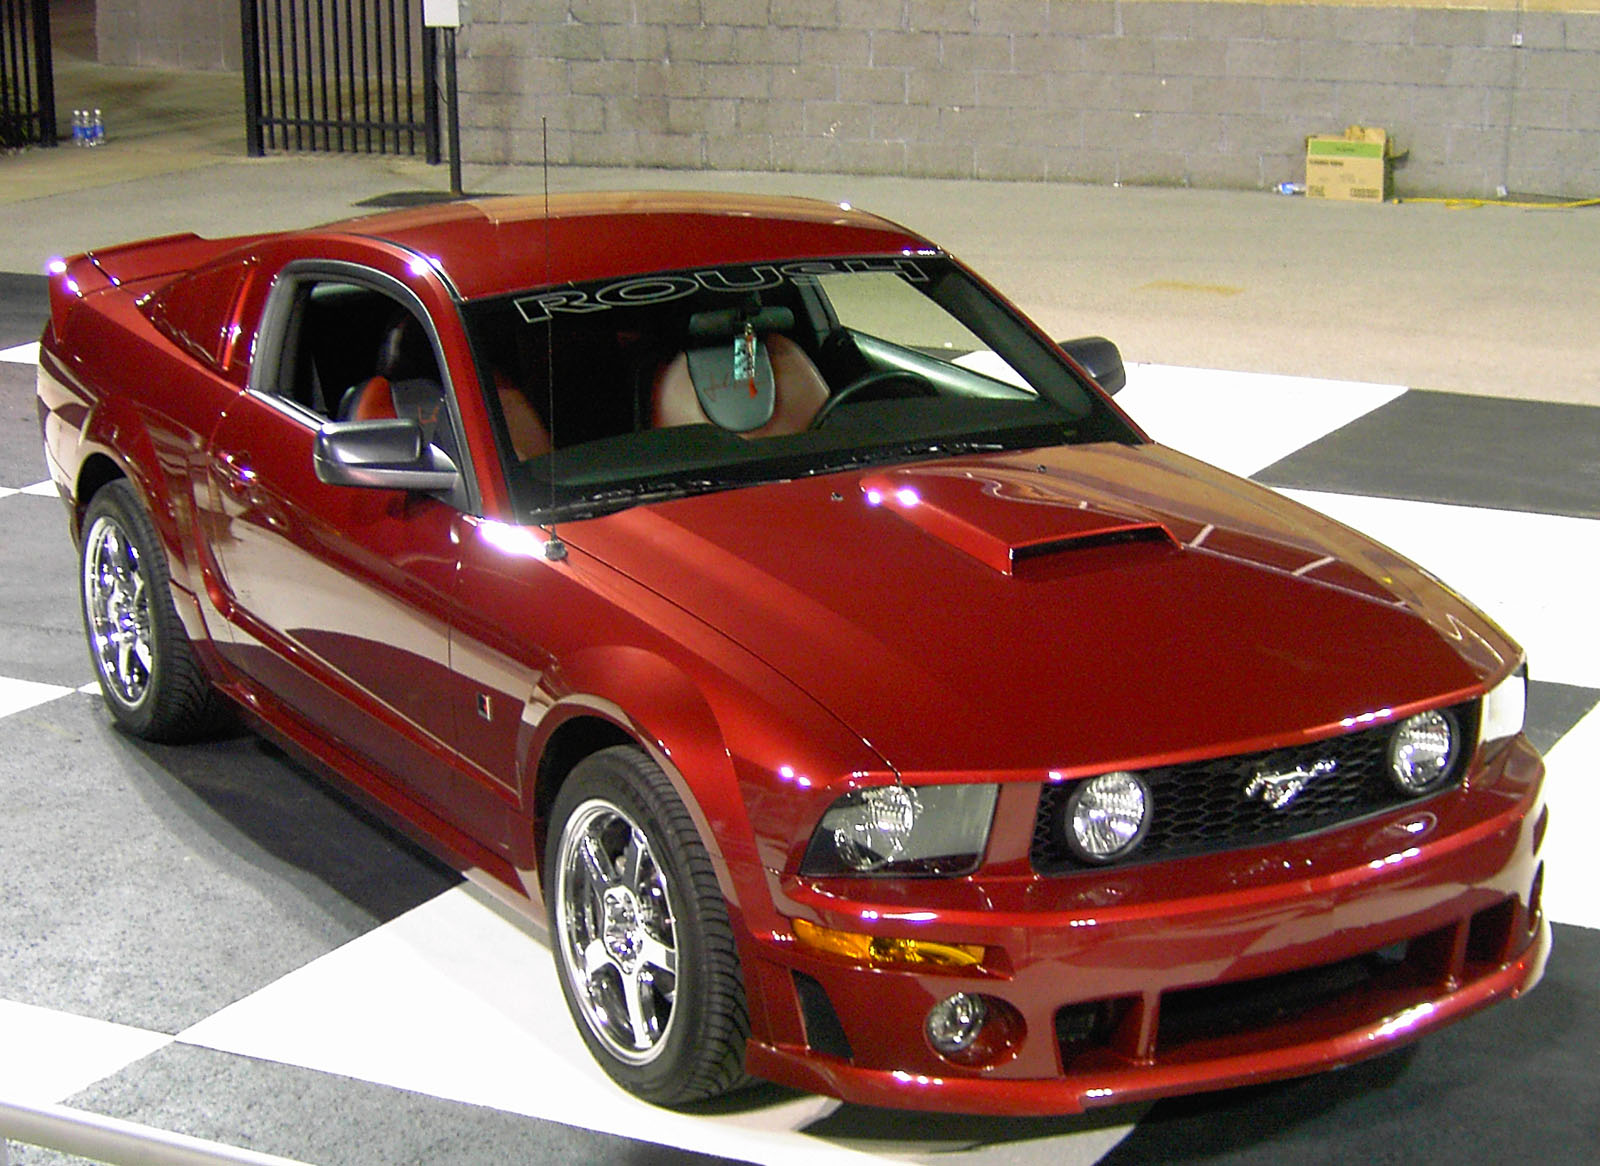 2006 Ford Mustang Gt 0-60 Time